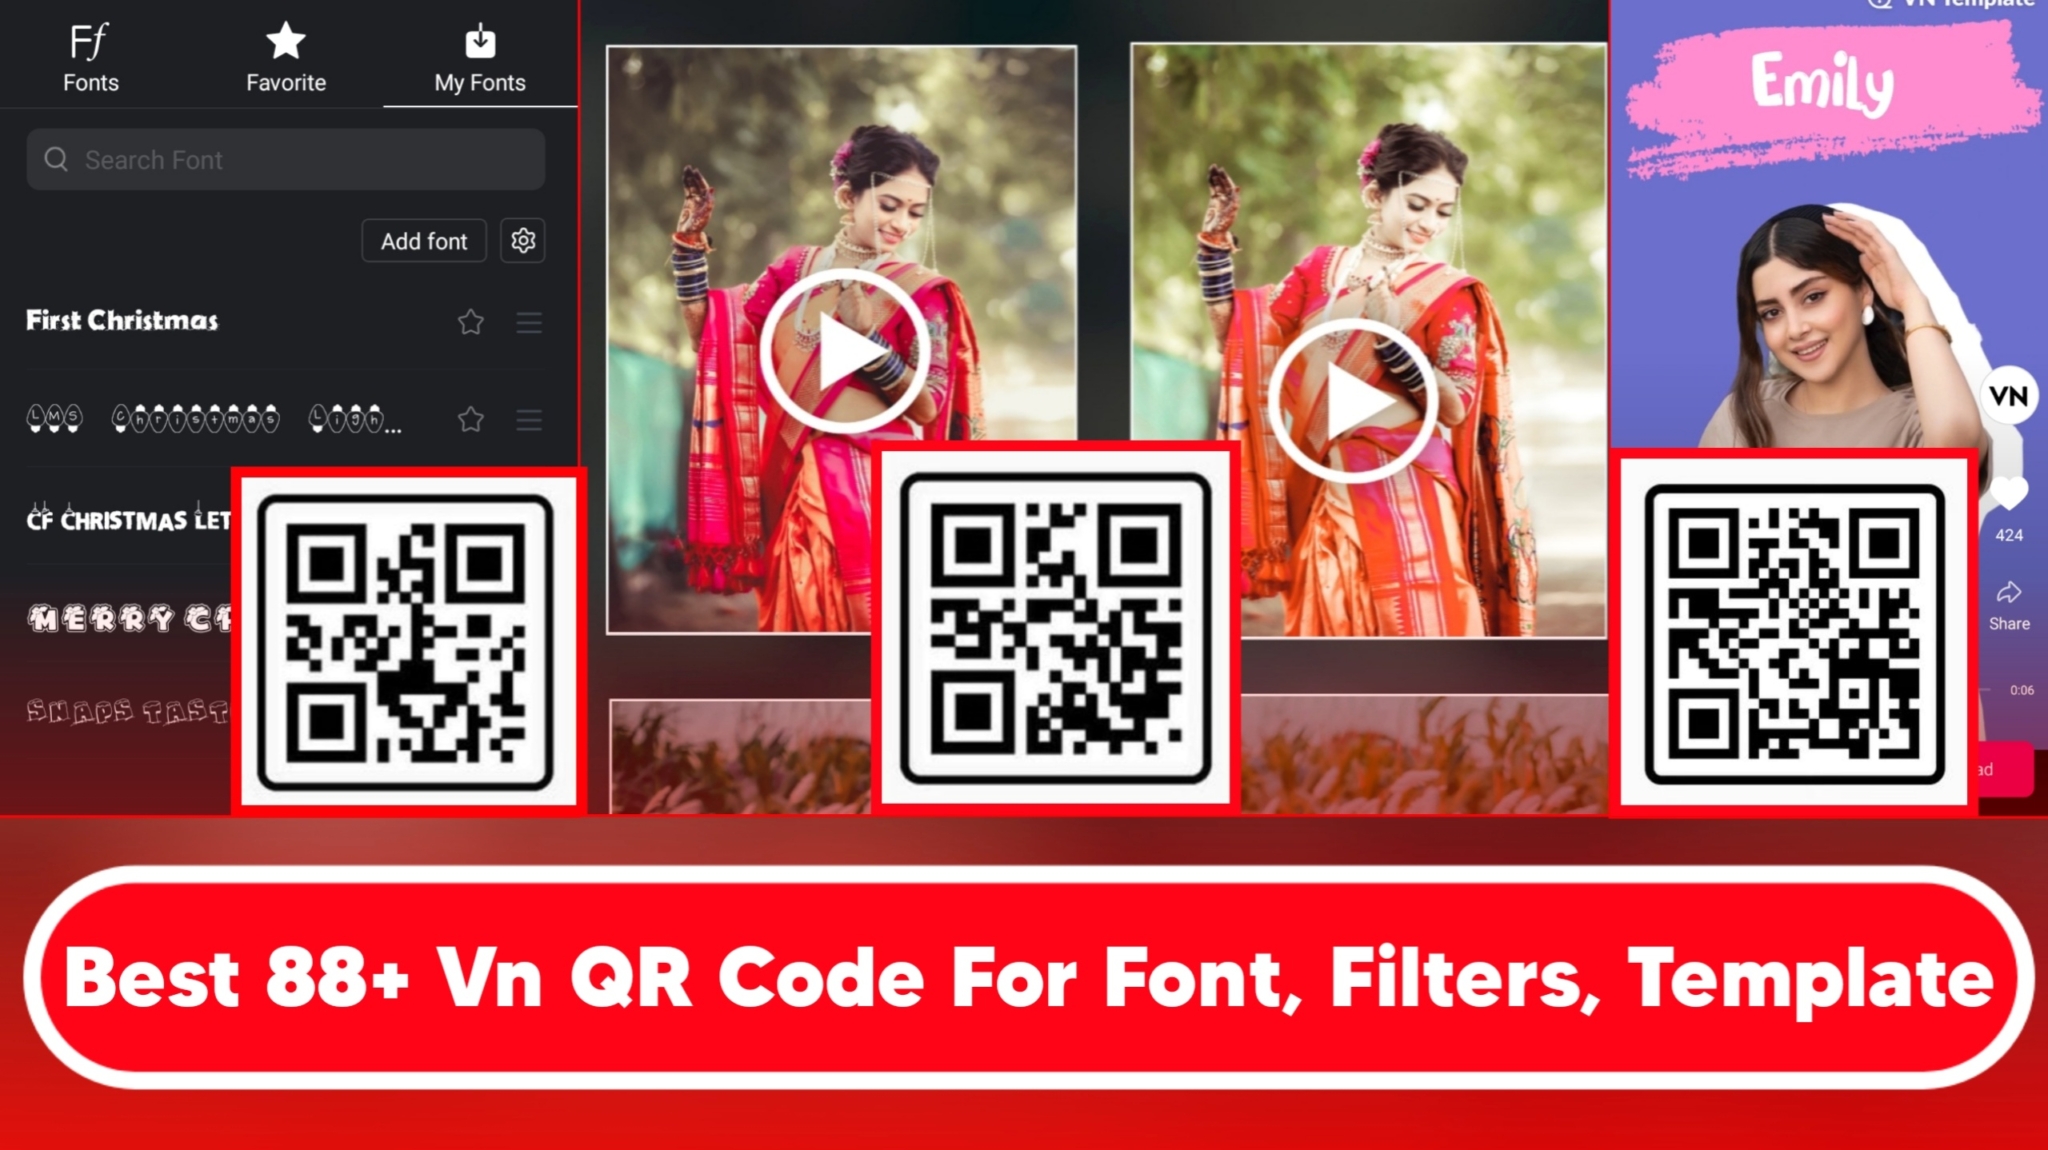 Best 88+ Vn QR Code For Font, Filter And Template